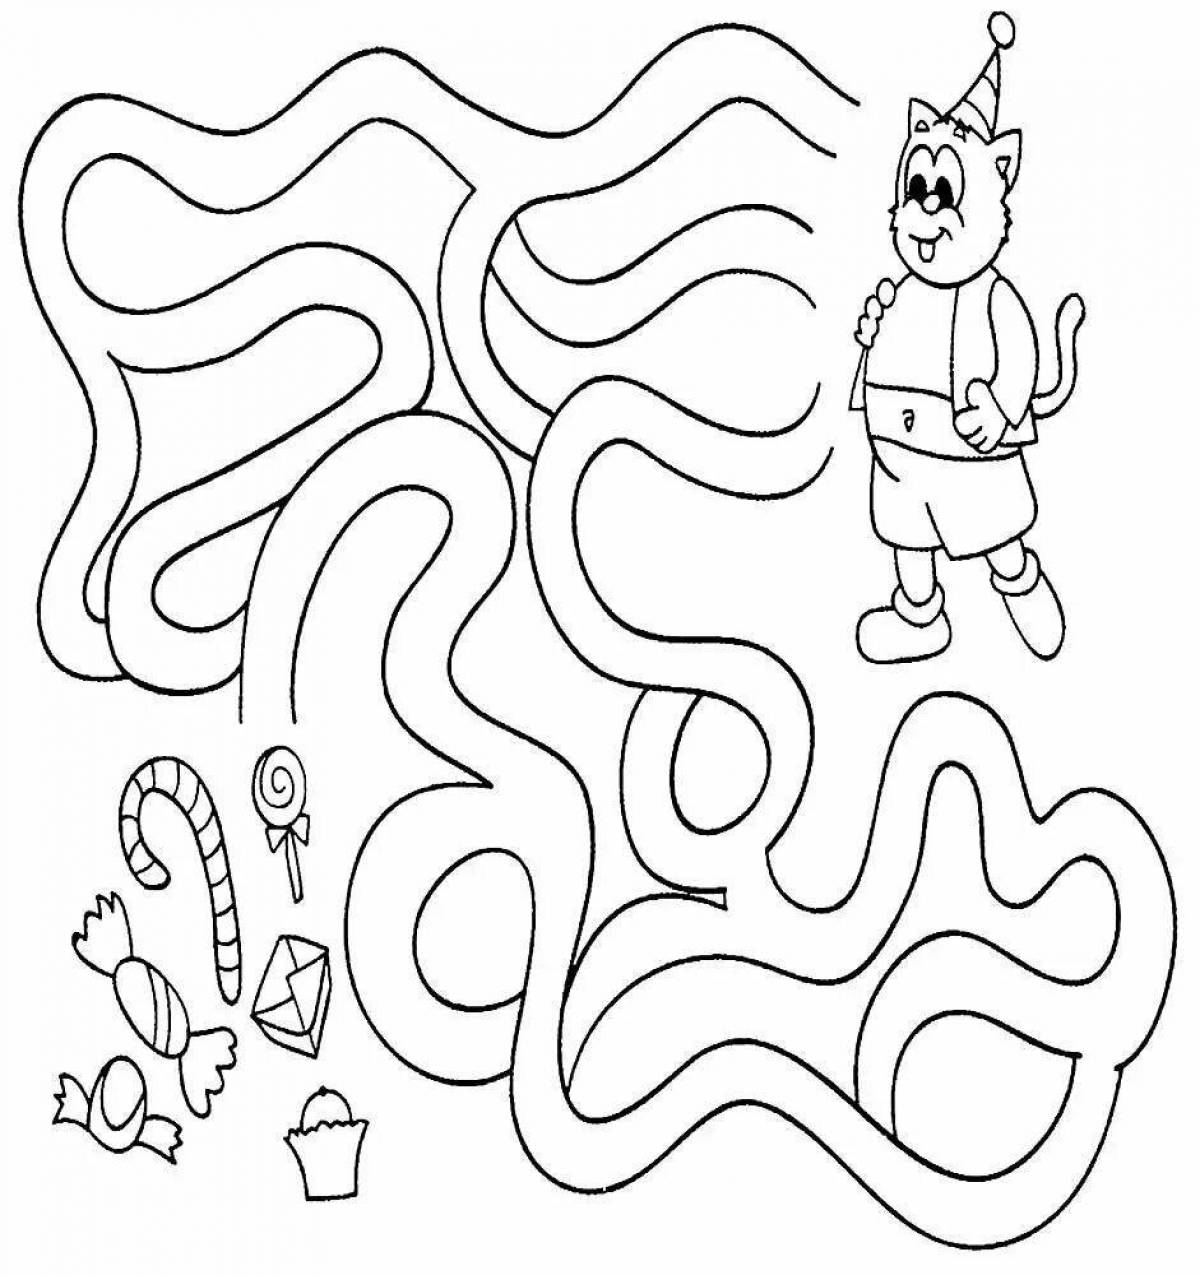 Outstanding kids coloring games for 4 year olds